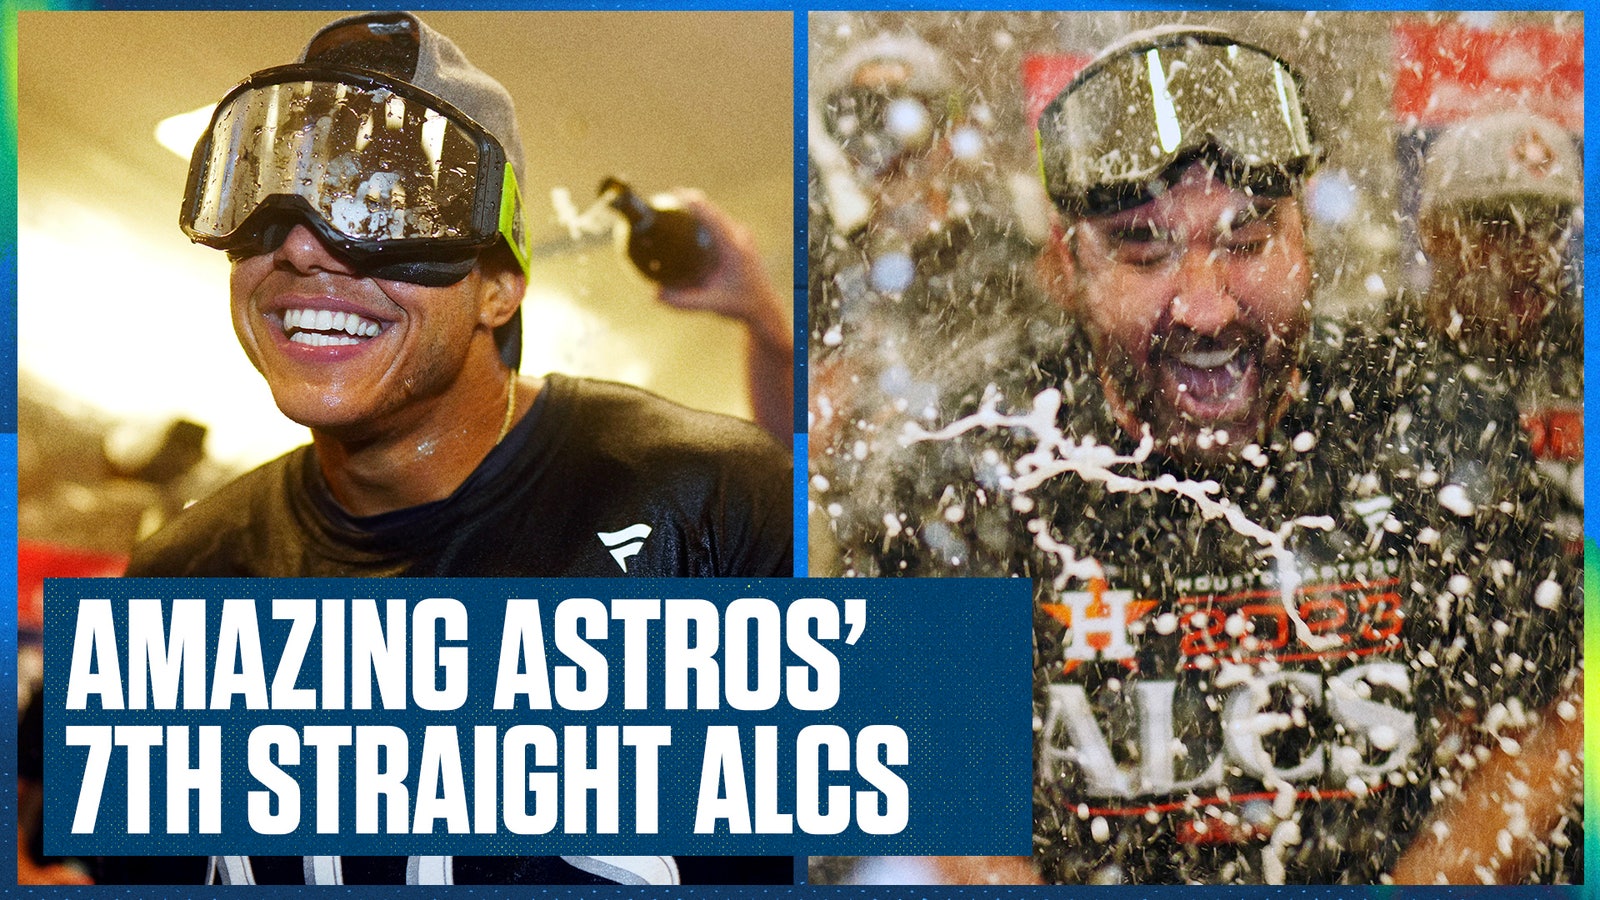 The Astros advance to the seventh straight ALCS and will face the Rangers